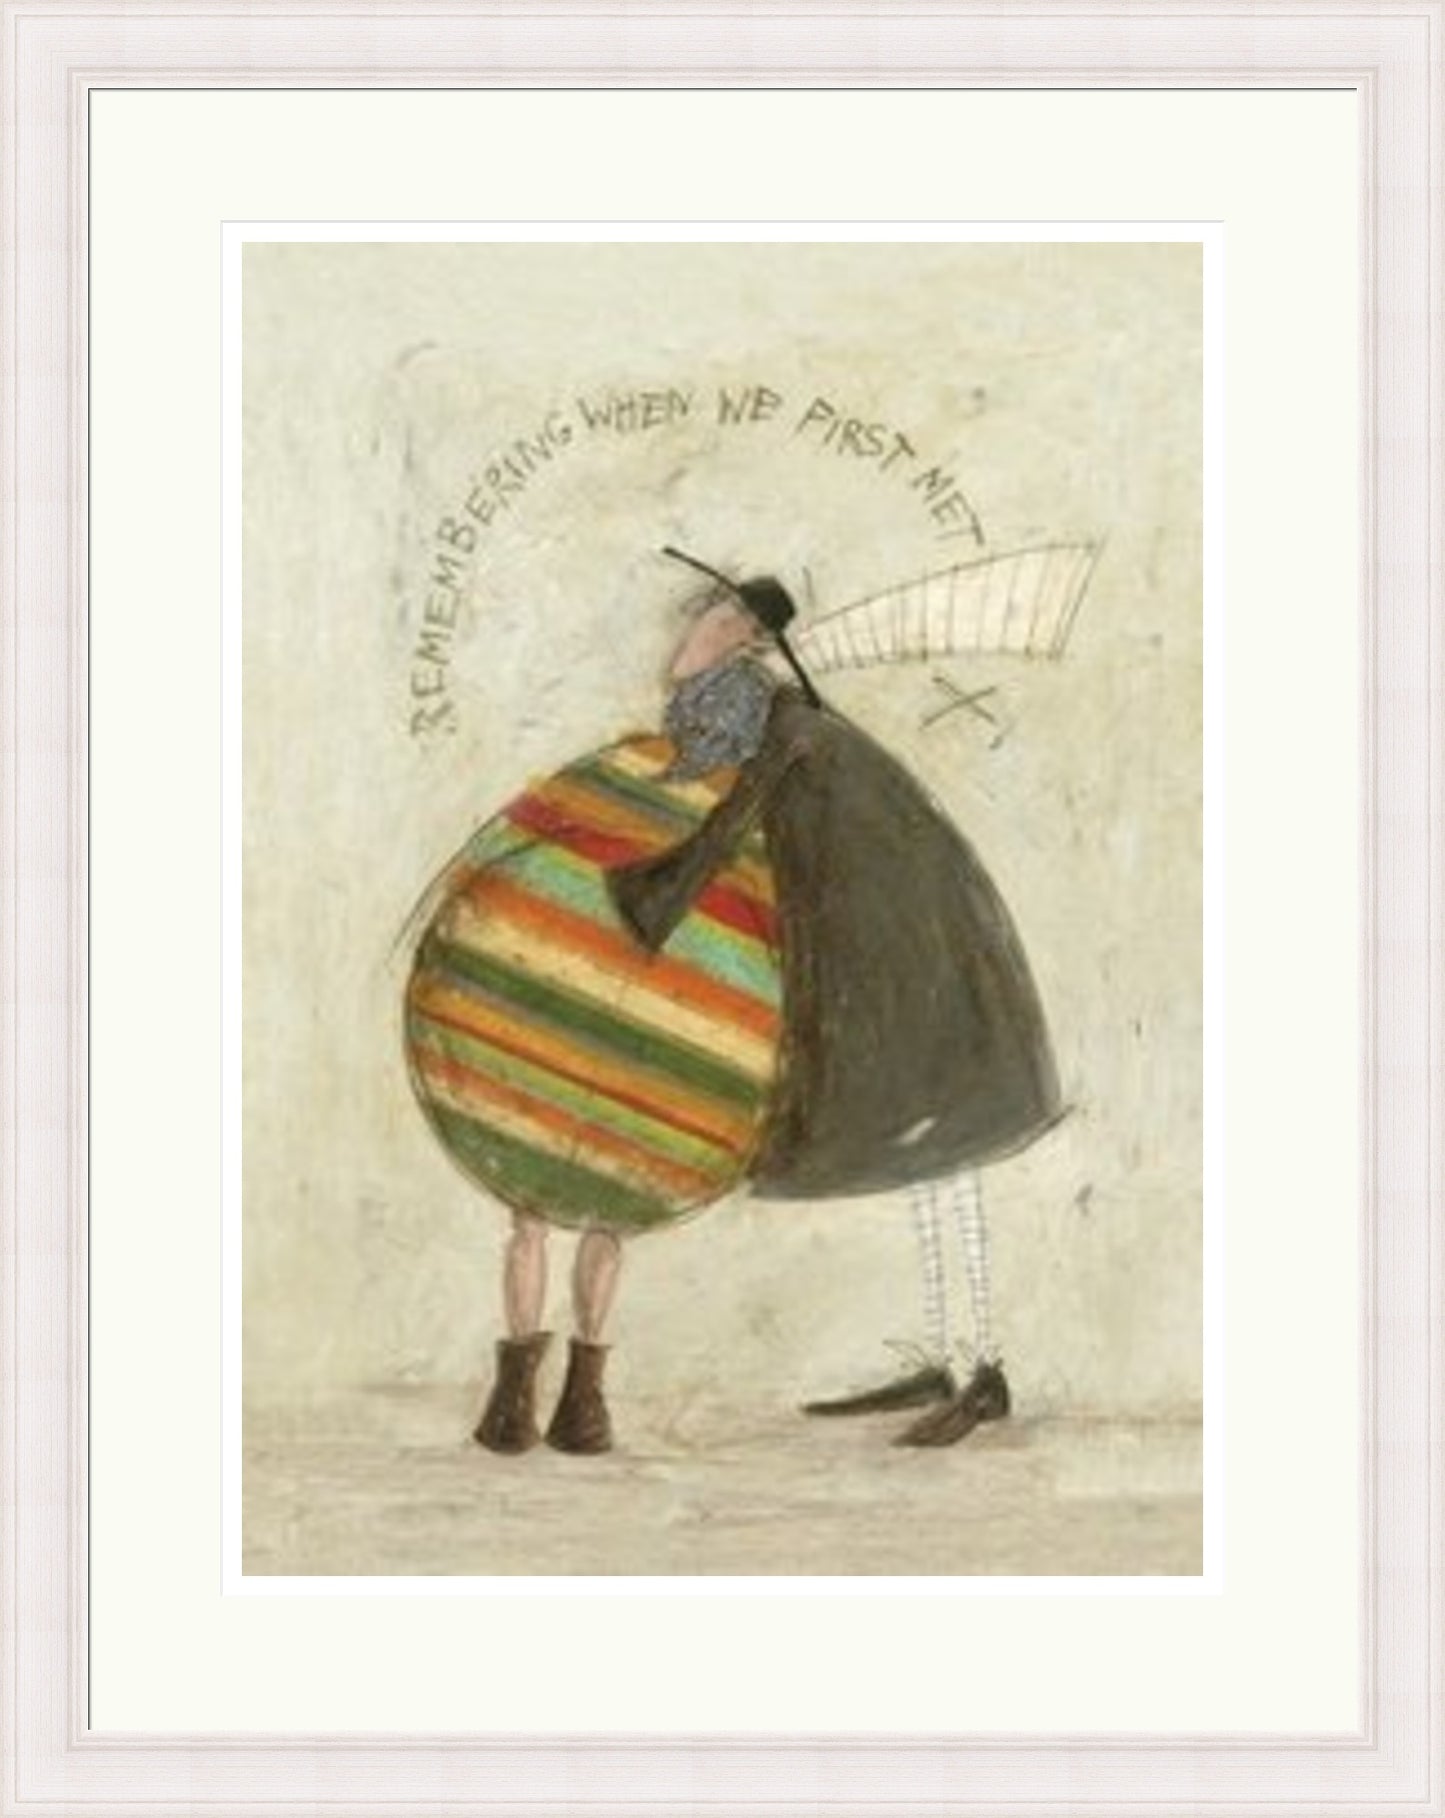 Remembering When We First Met by Sam Toft